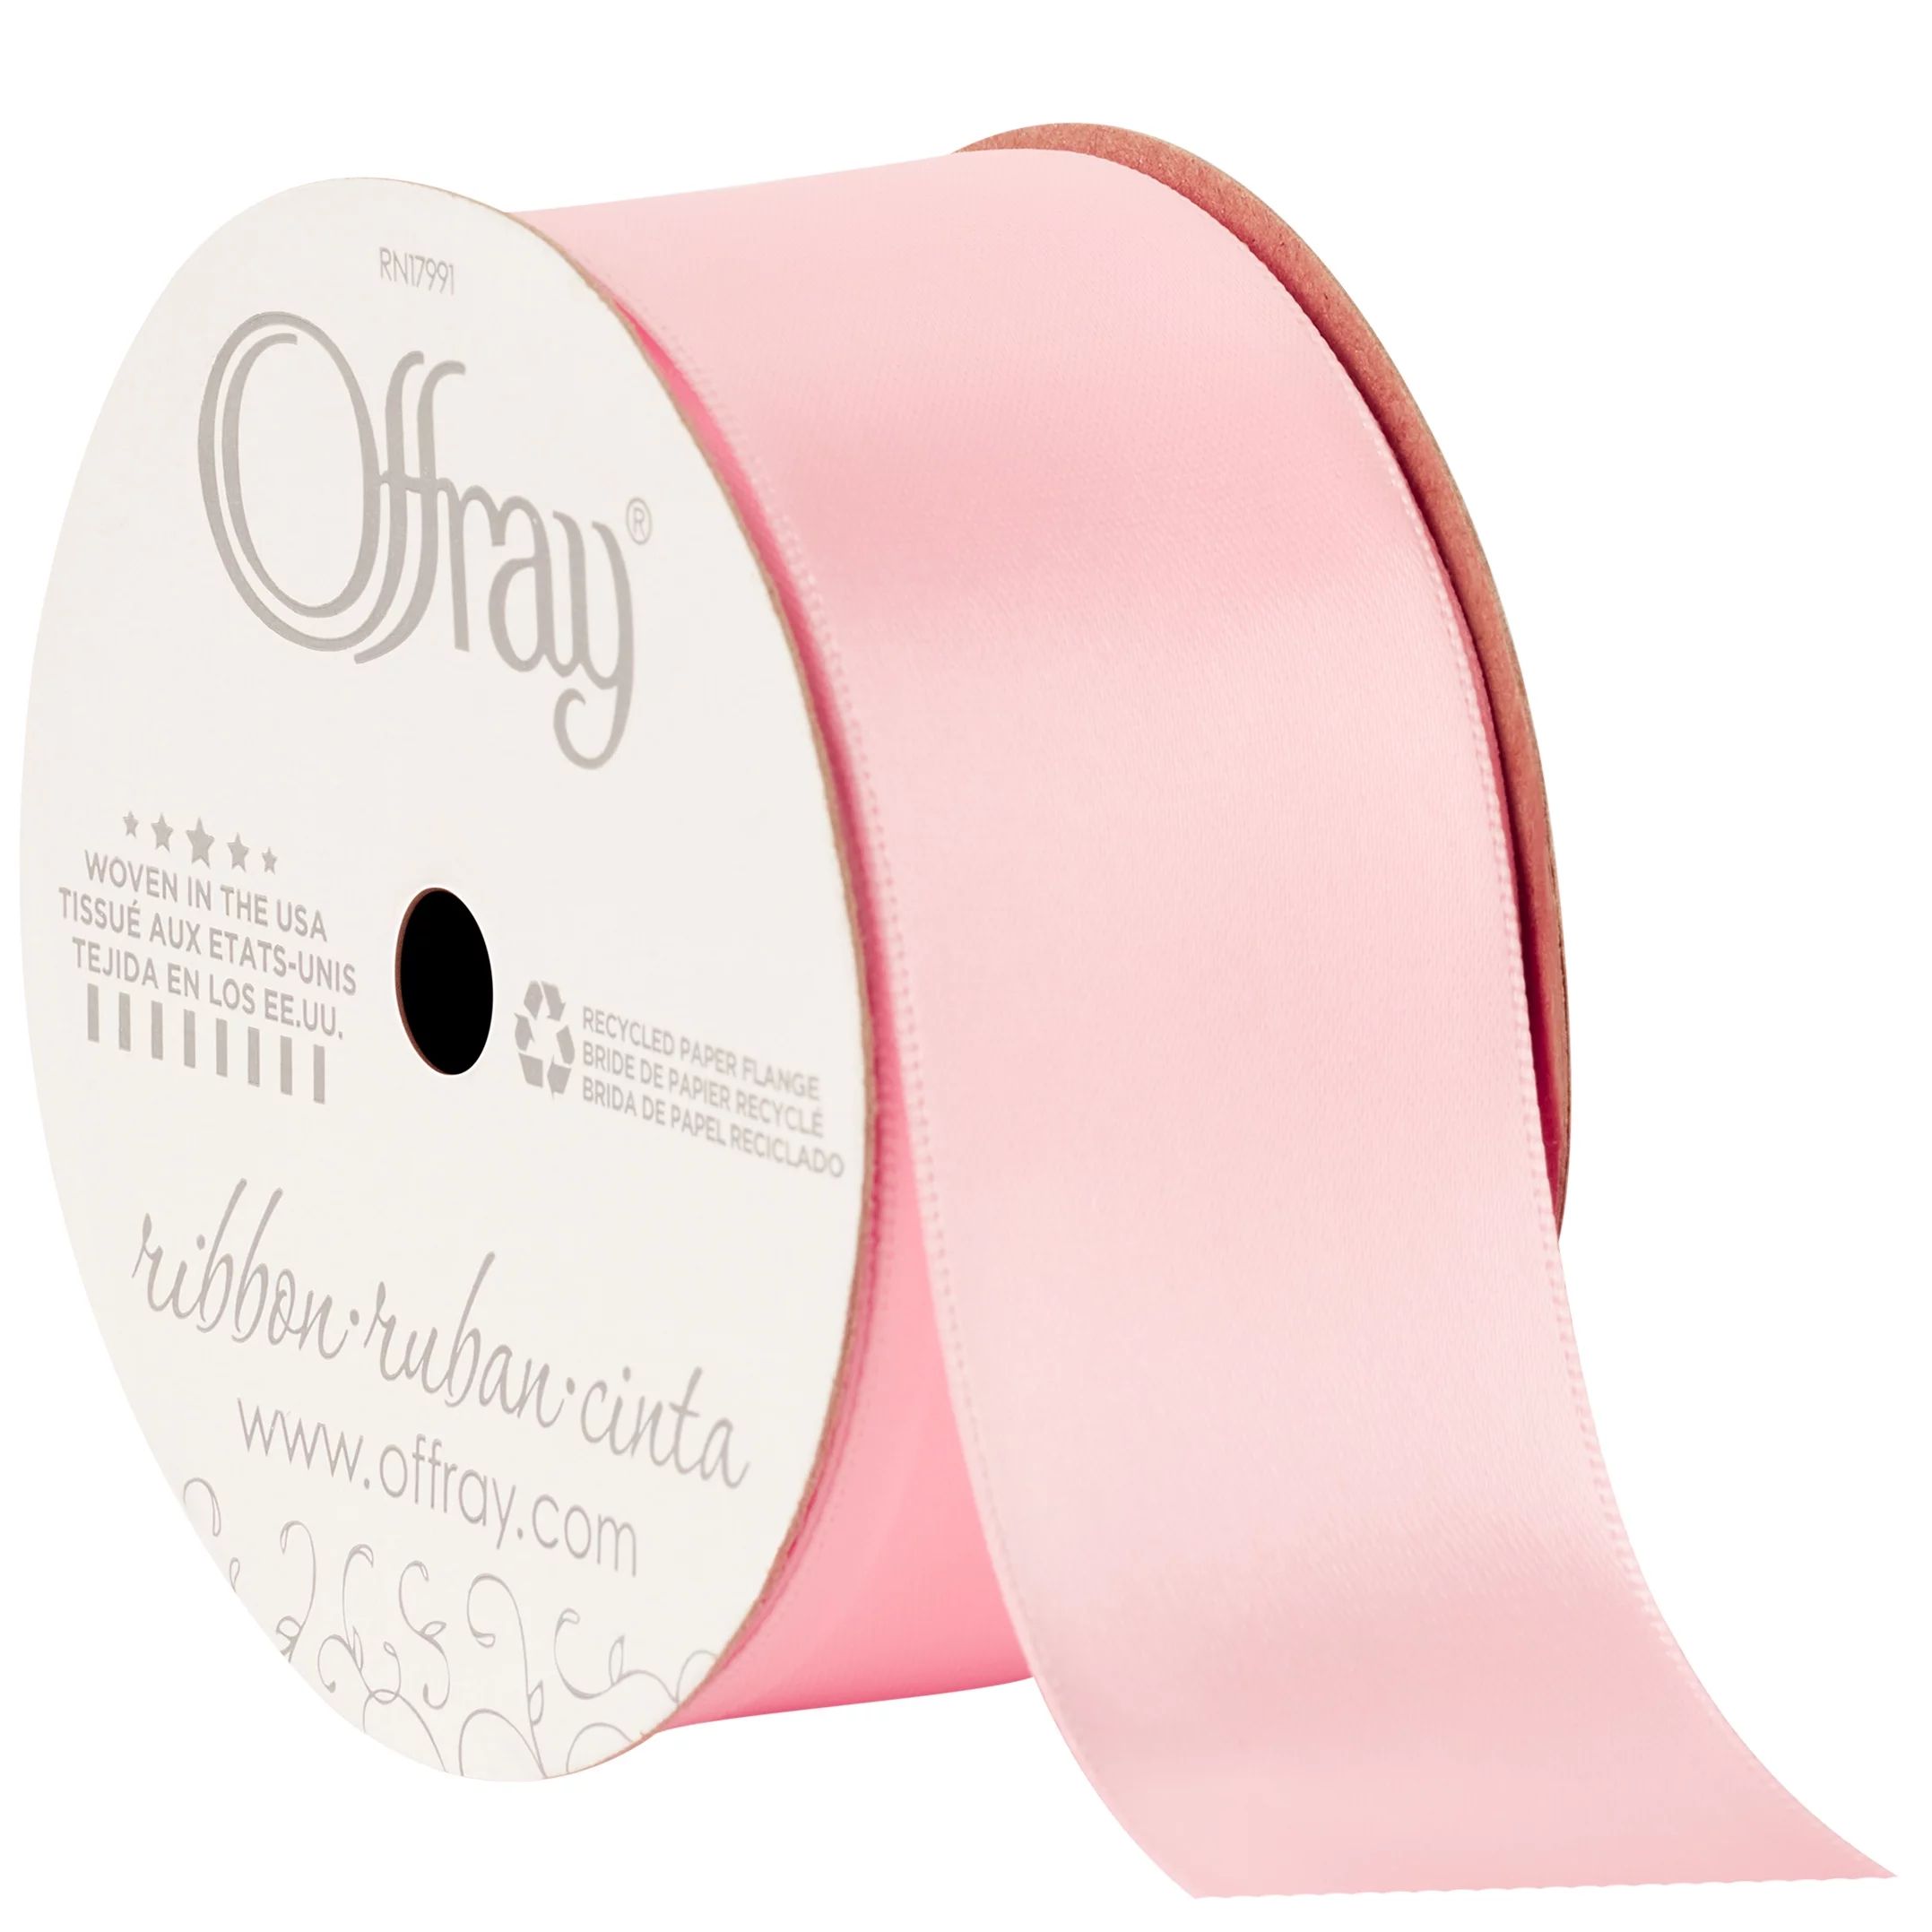 Offray Ribbon, Light Pink 1 1/2 inch Double Face Satin Polyester Ribbon, 12 feet | Walmart (US)